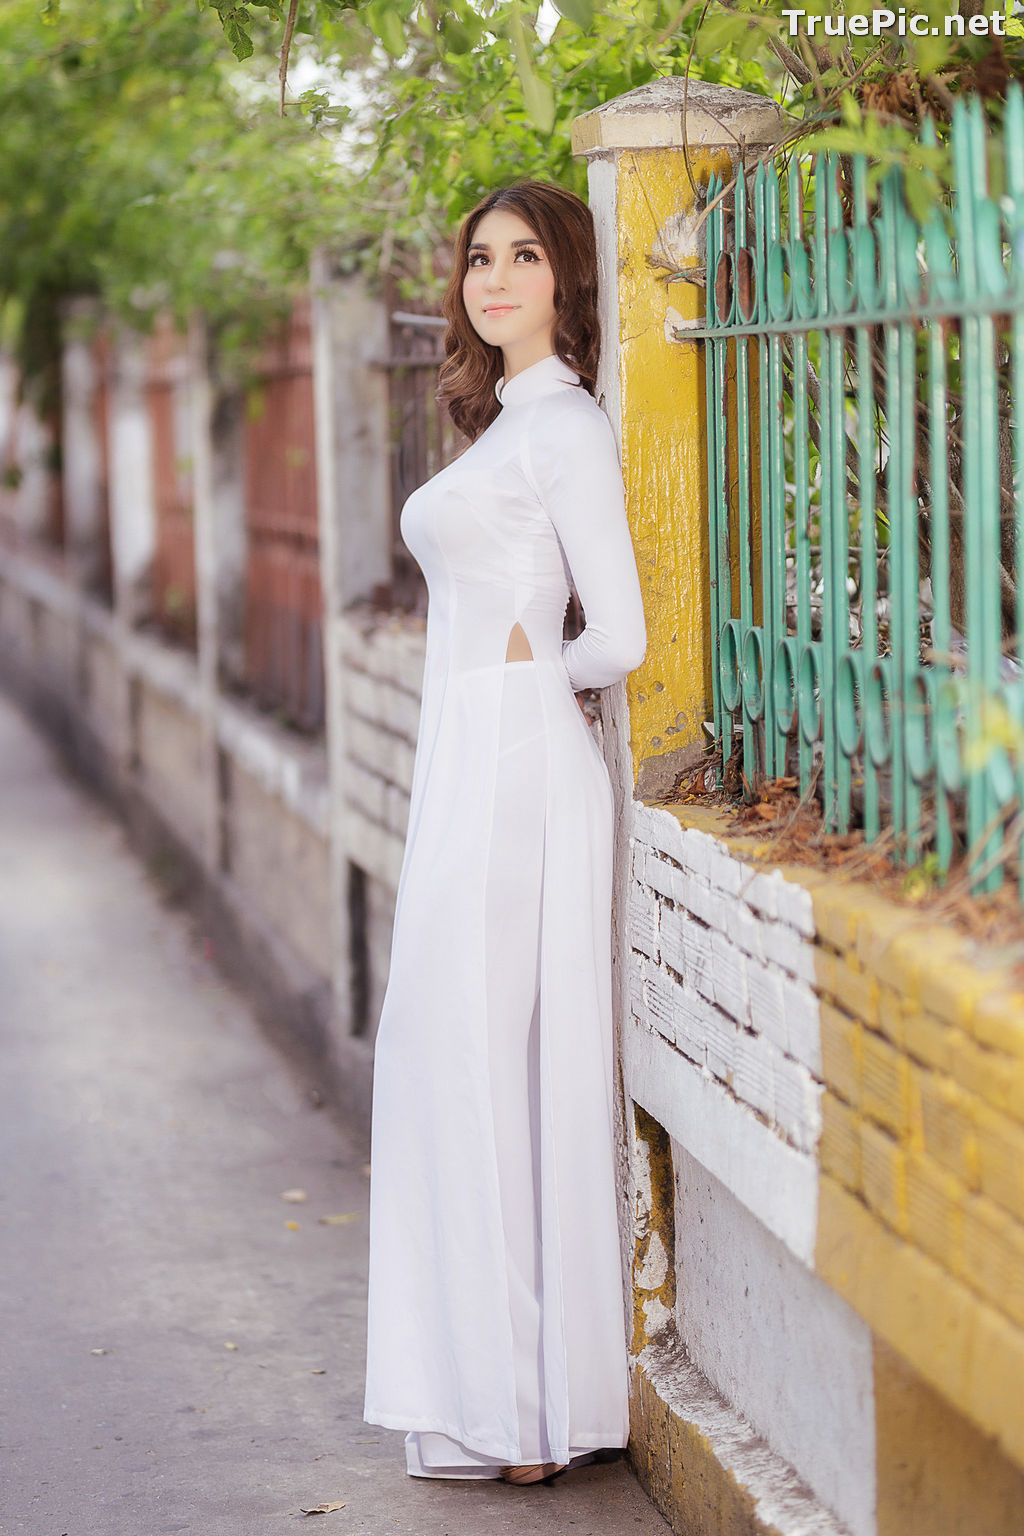 Image The Beauty of Vietnamese Girls with Traditional Dress (Ao Dai) #3 - TruePic.net - Picture-53